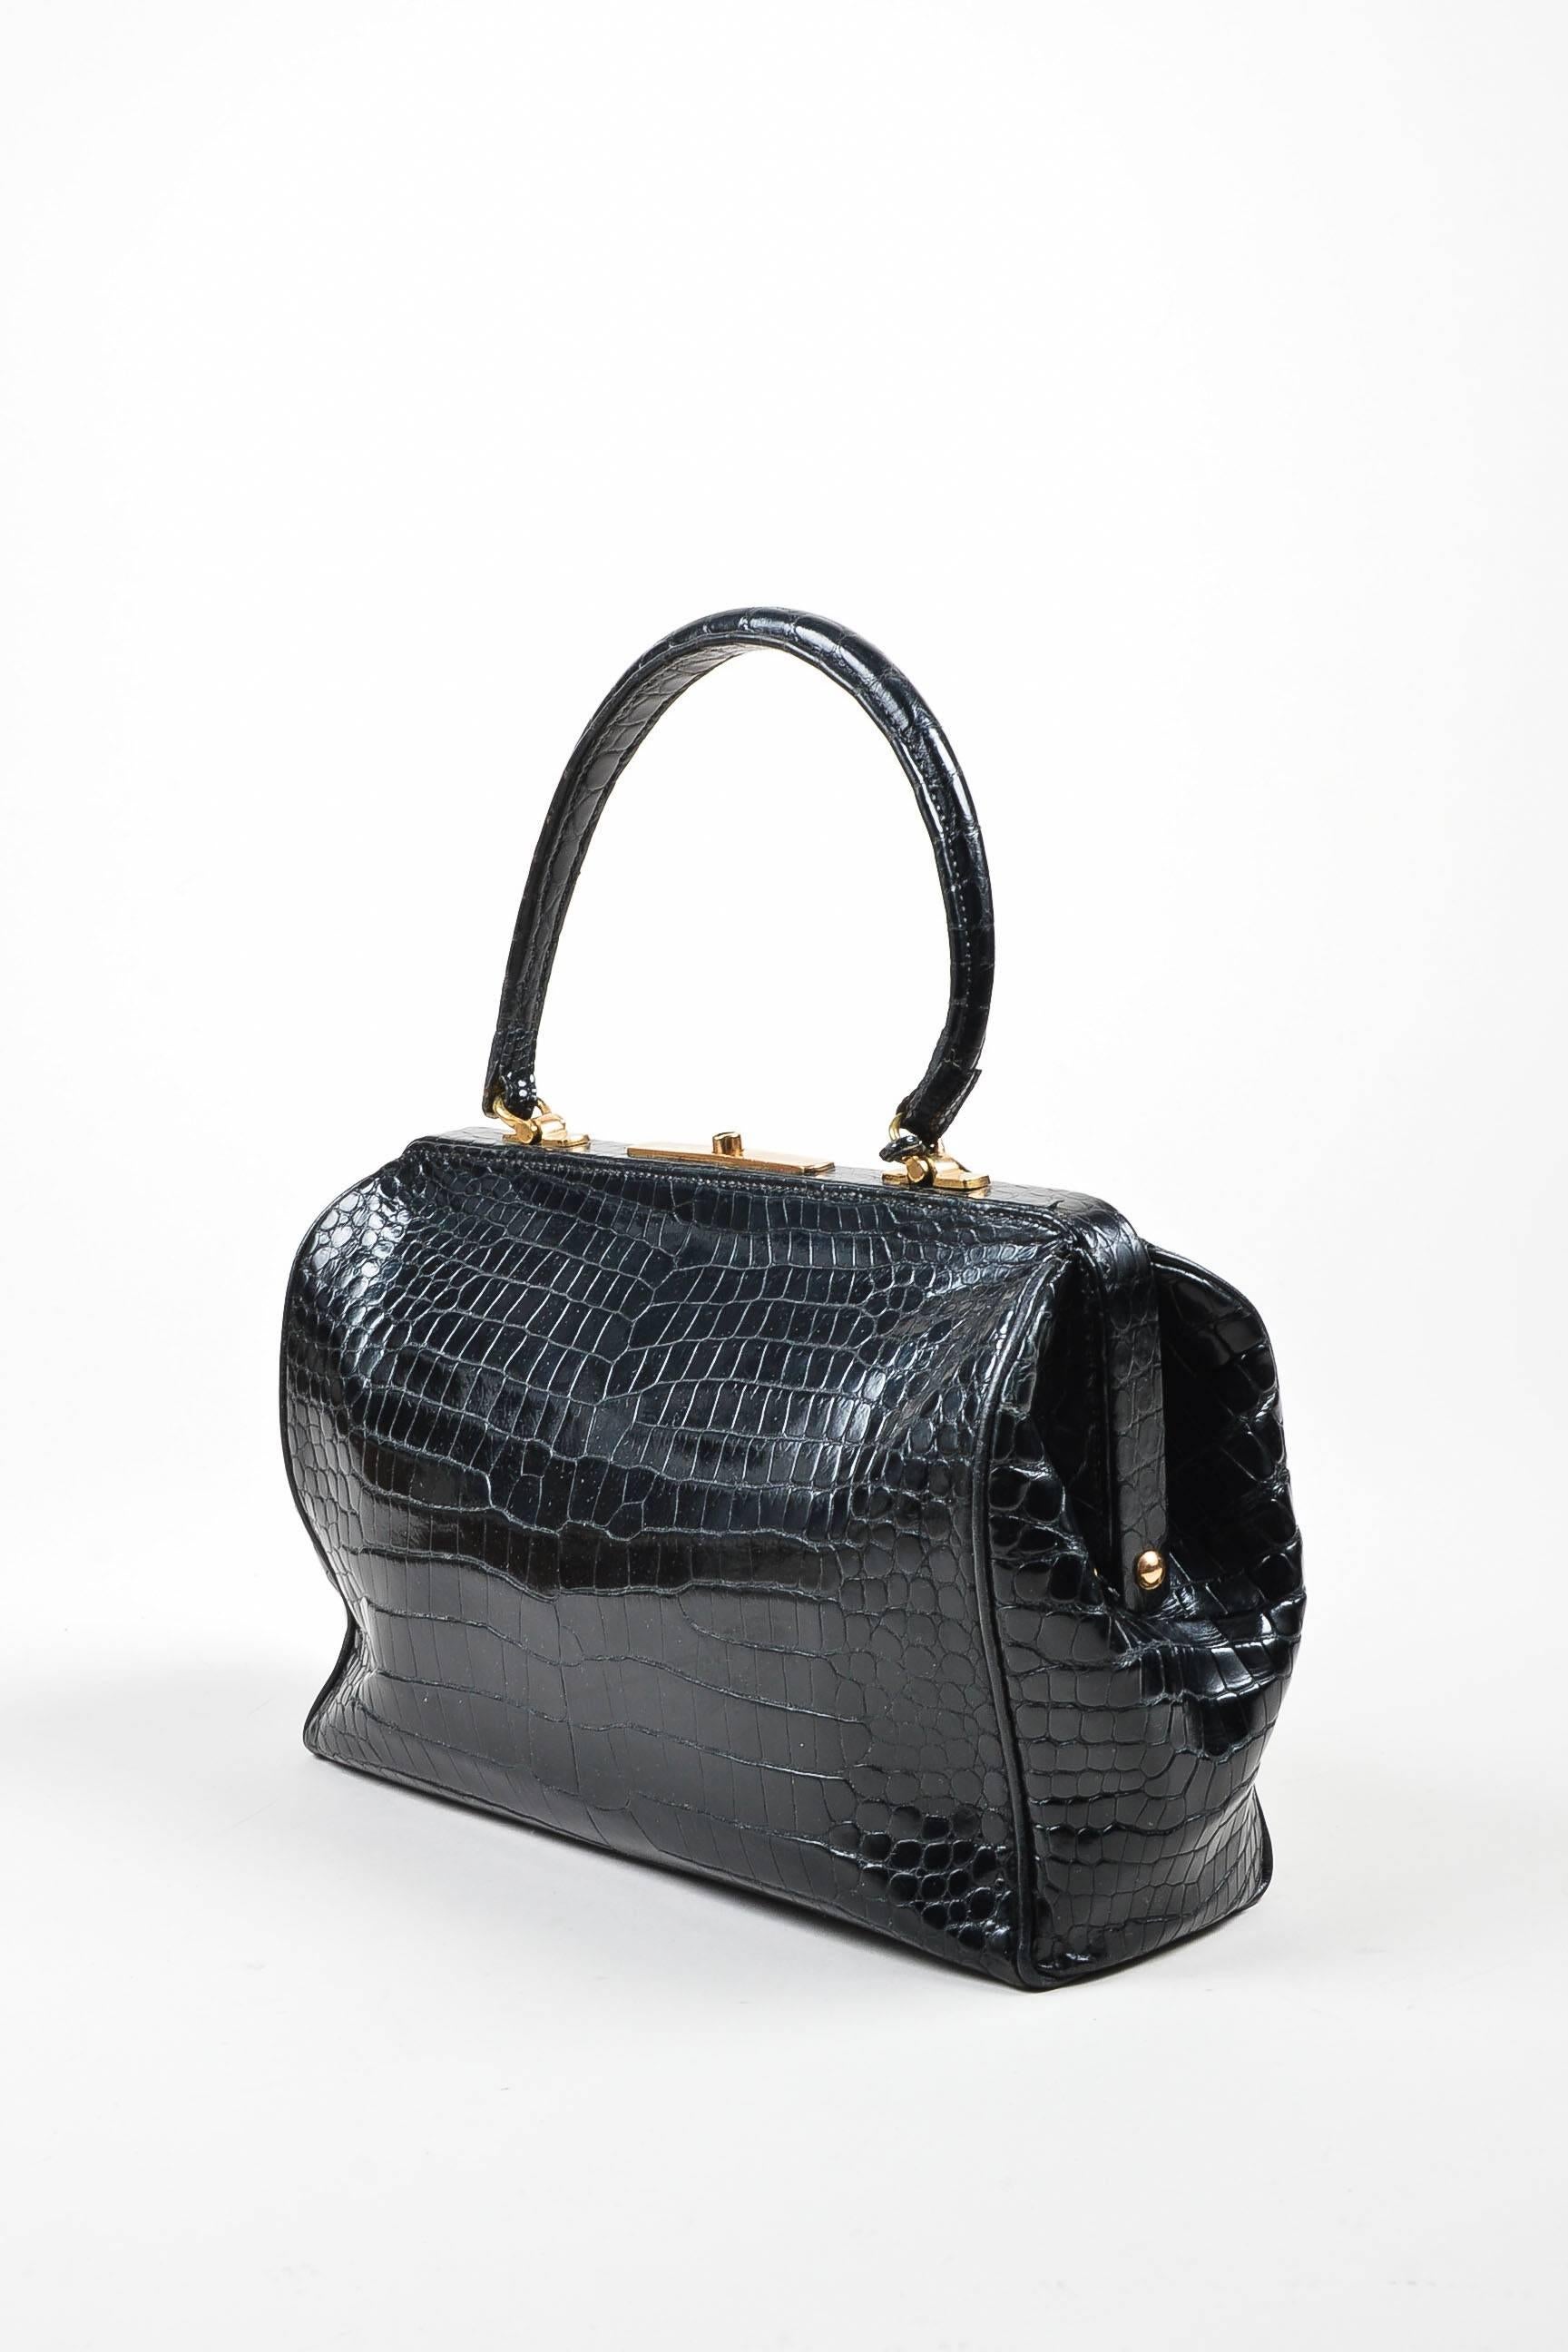 Comes with dust bag. Vintage Hermes satchel handbag. This rare collector's item, designer circa the 1960's, is a stunning addition to any wardrobe. Rectangular shape- resembles the silhouette of an old doctor's bag. Frame structure. Black crocodile